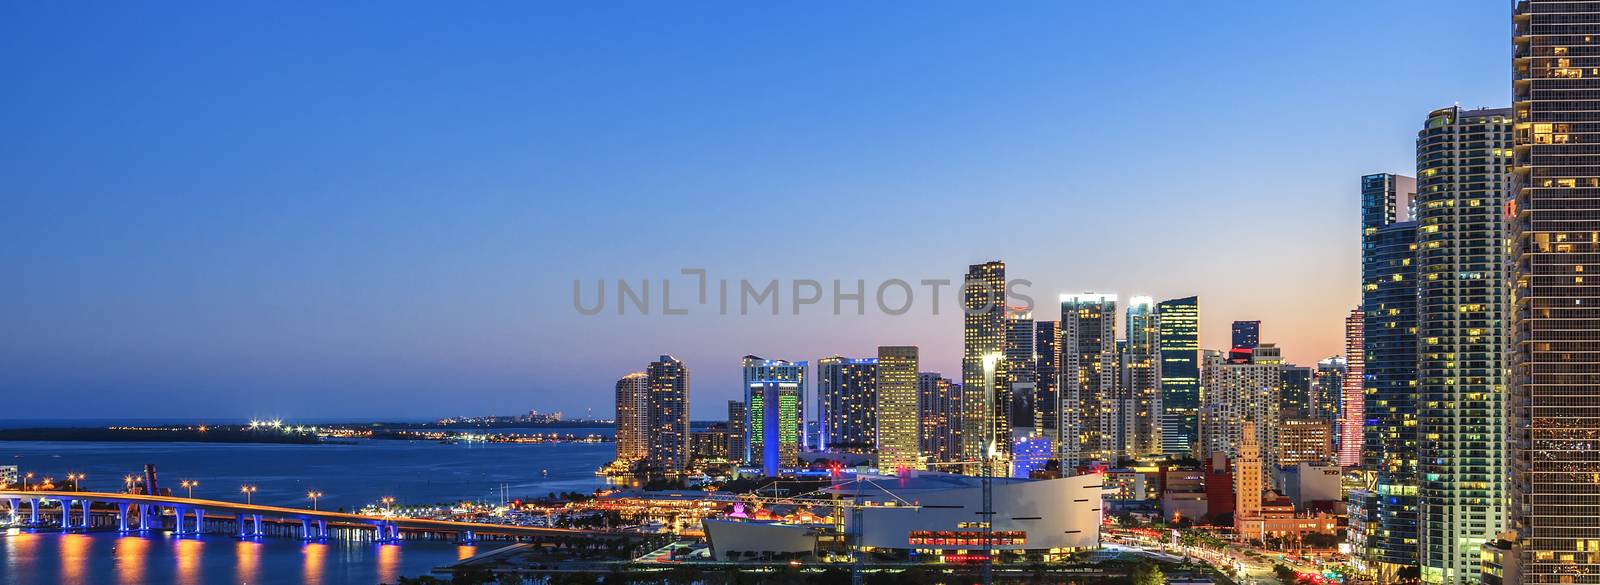 Panoramic view of Miami by vwalakte